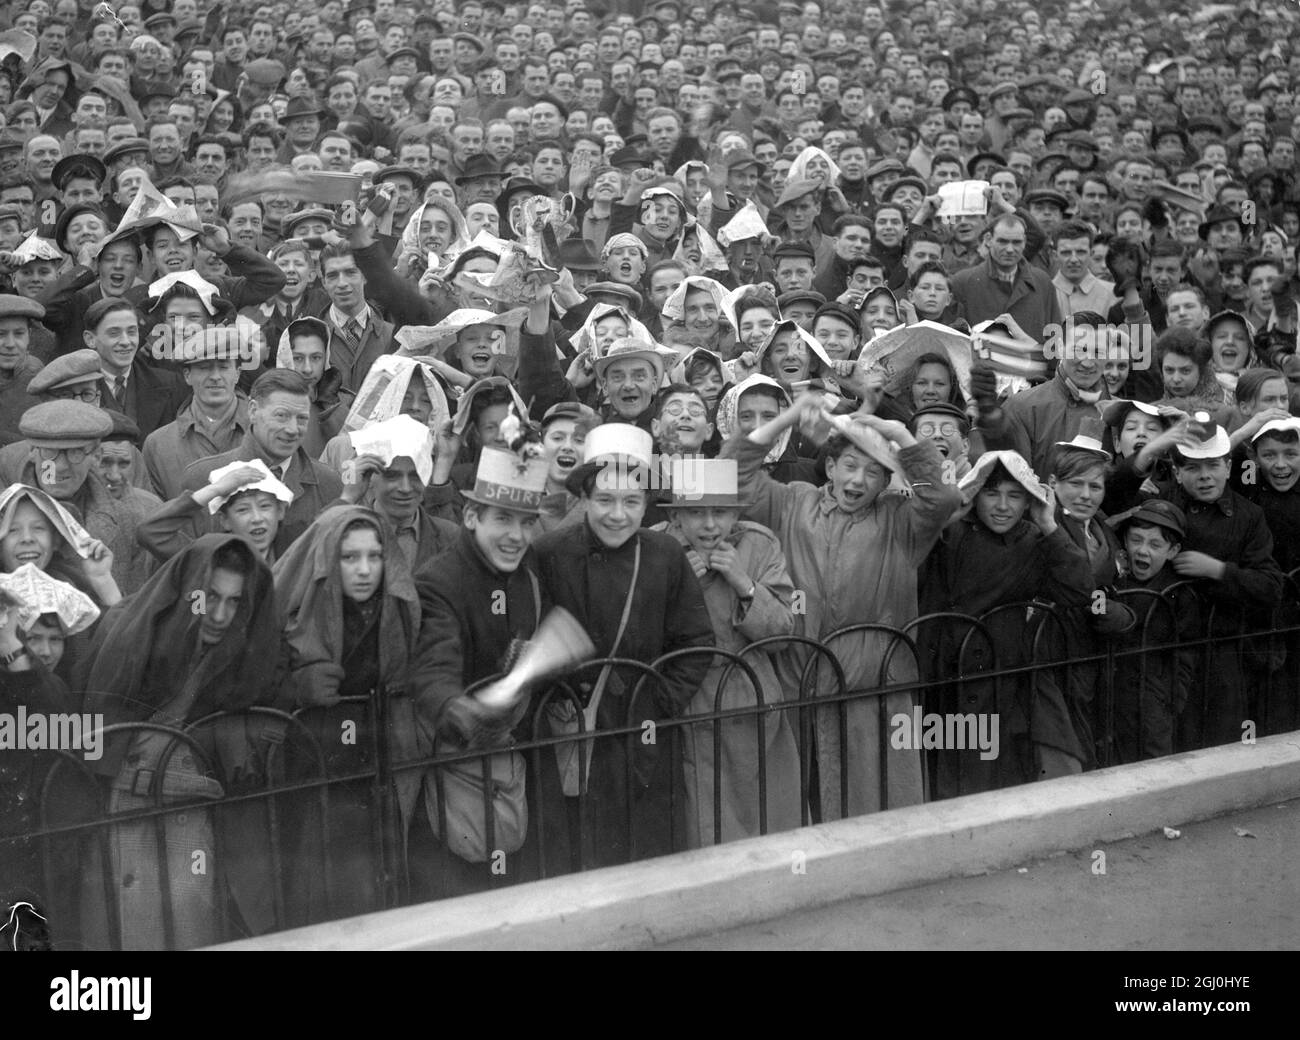 Enormous crowds flocked to Highbury today to watch the 1st Round Cup battle between Arsenal and Tottenham Hotspurs, the first time these two teams have met in a Cup game Arsenal supporters improvise umbrellas as they wait the start of game. 8 January 1949 Stock Photo